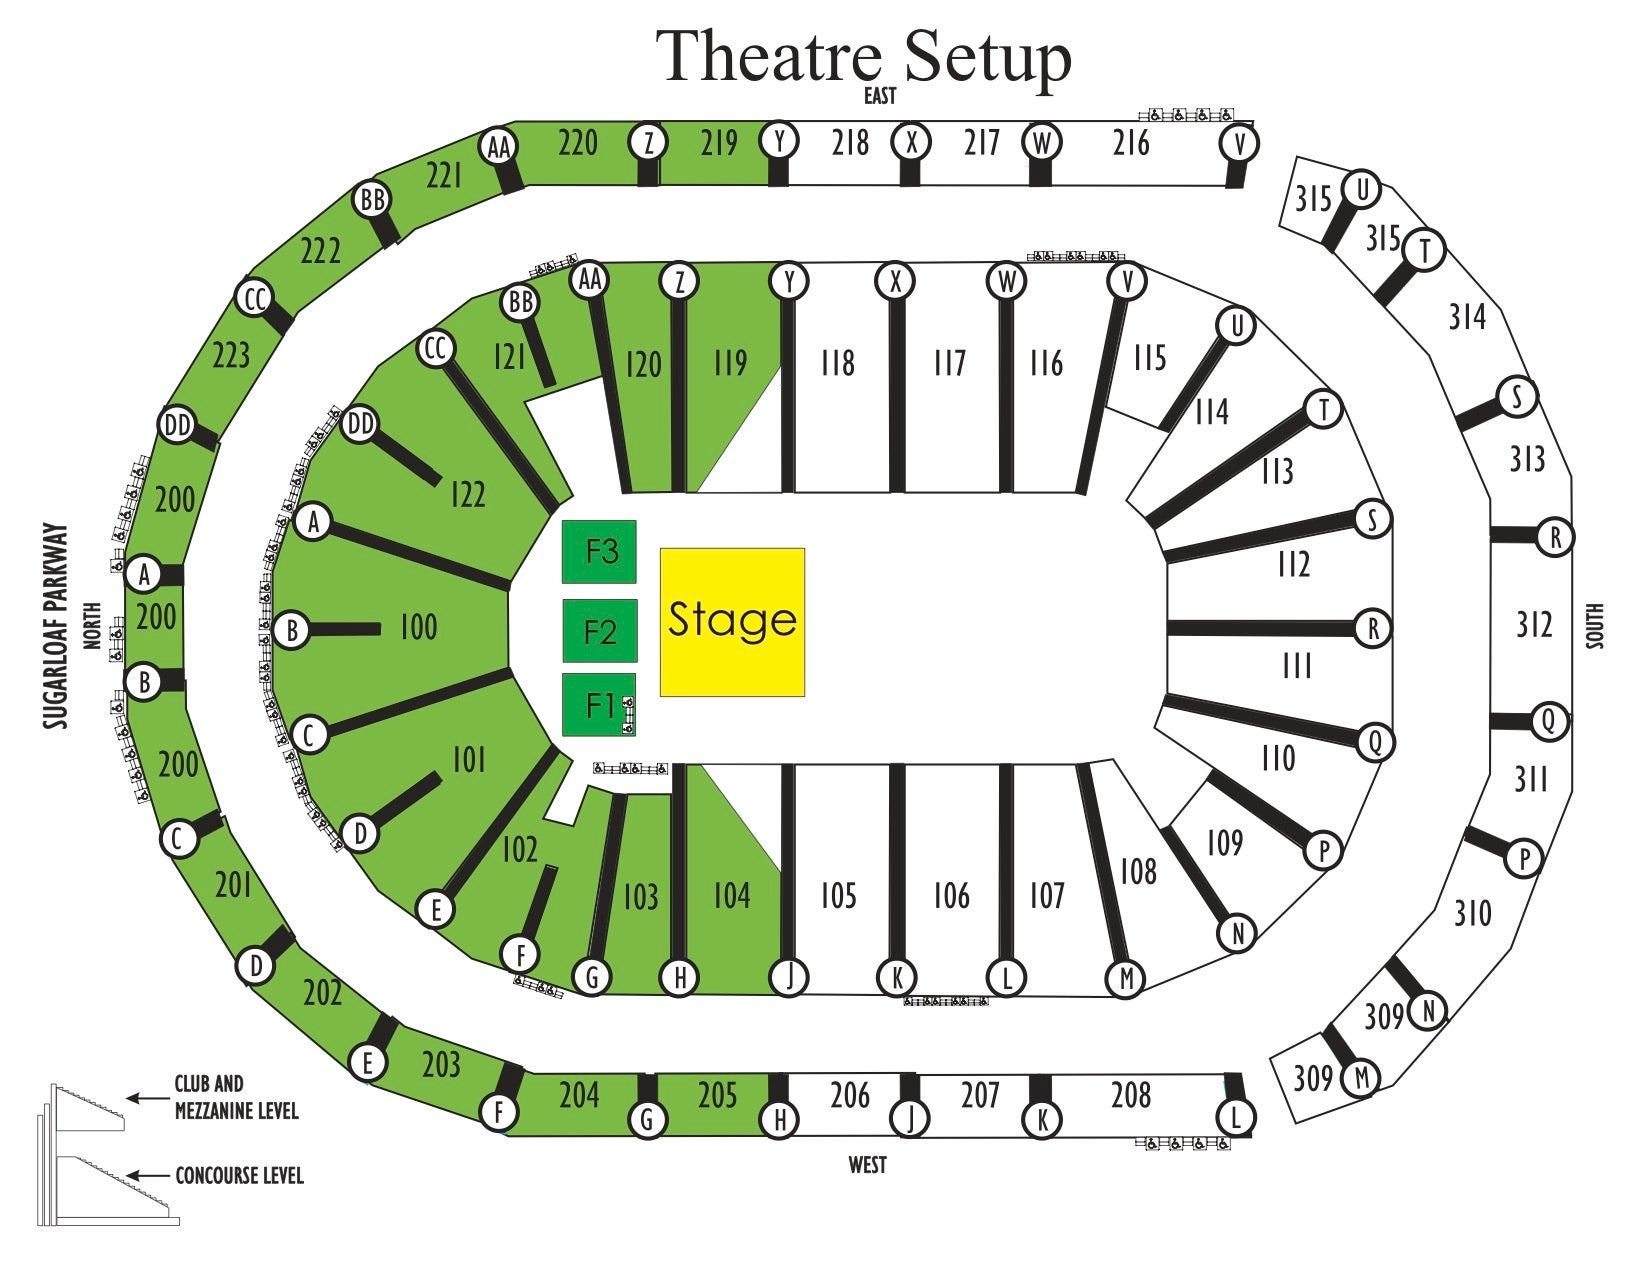 Cobb Energy Center Interactive Seating Chart